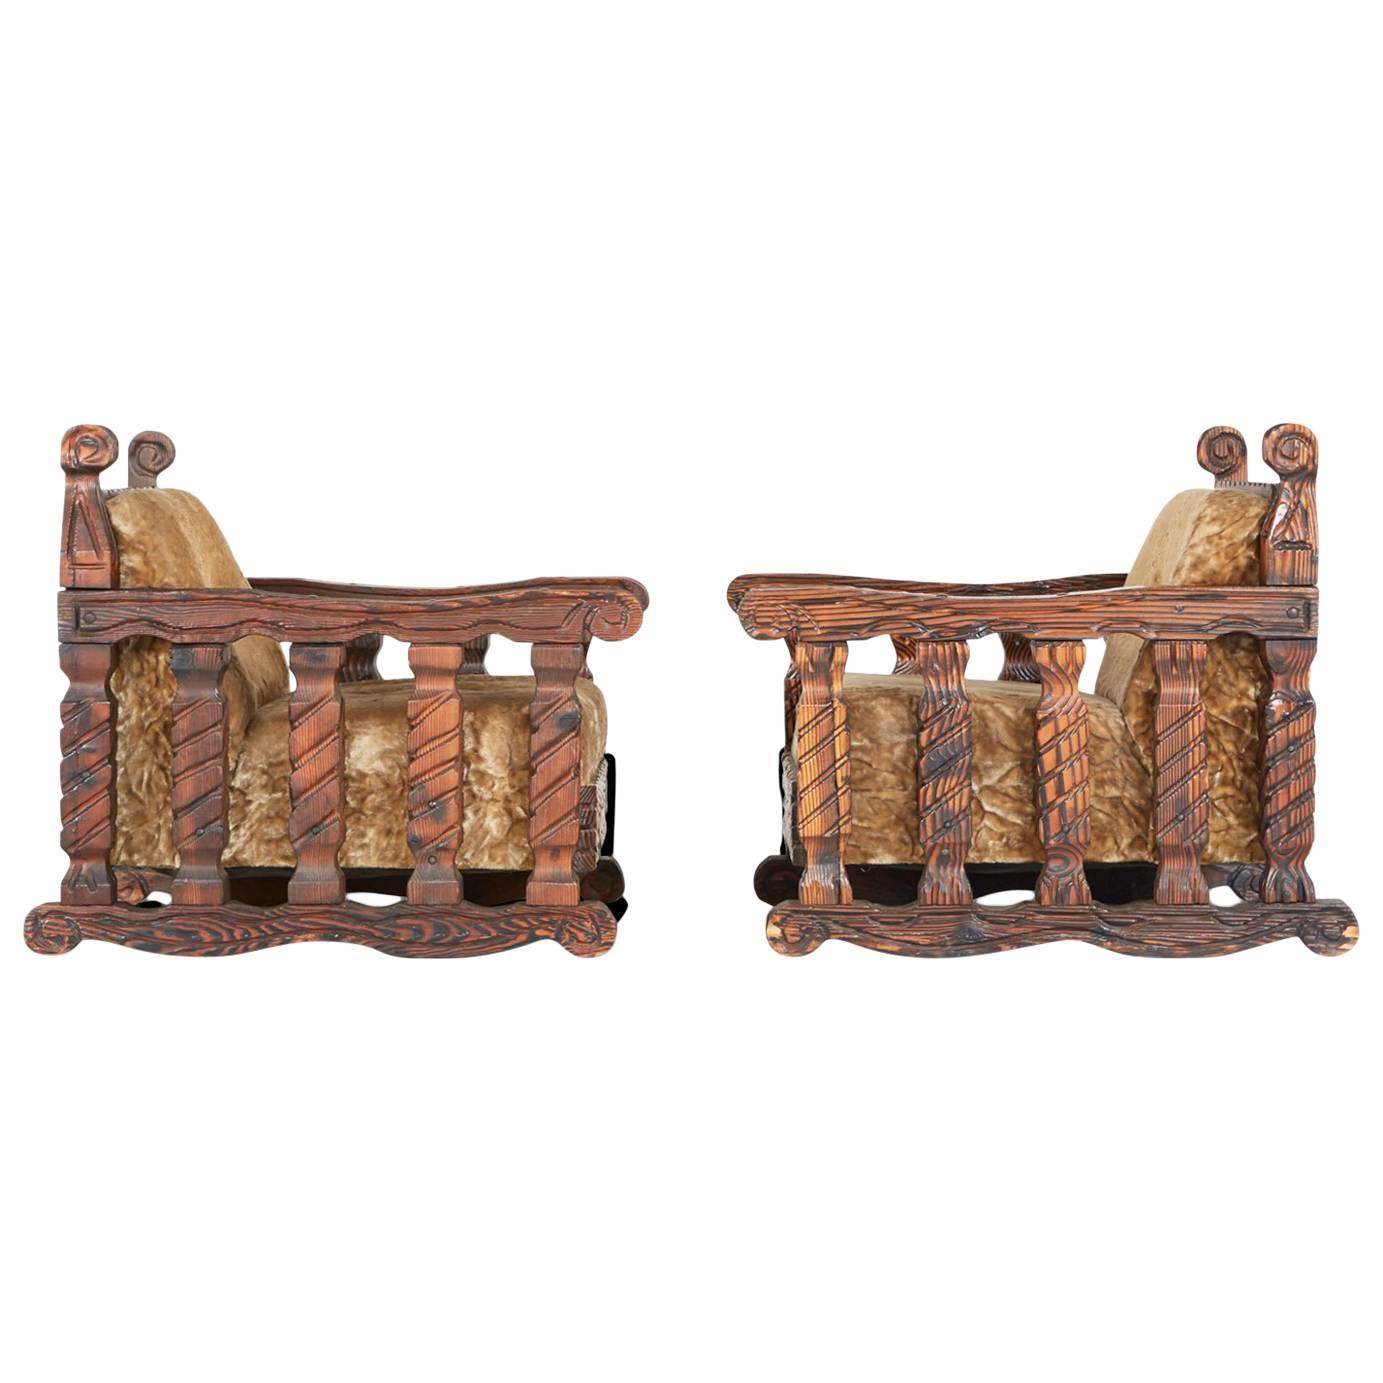 Carved Tiki Arm Chairs by William Westenhaver for WITCO, Pair, circa 1950